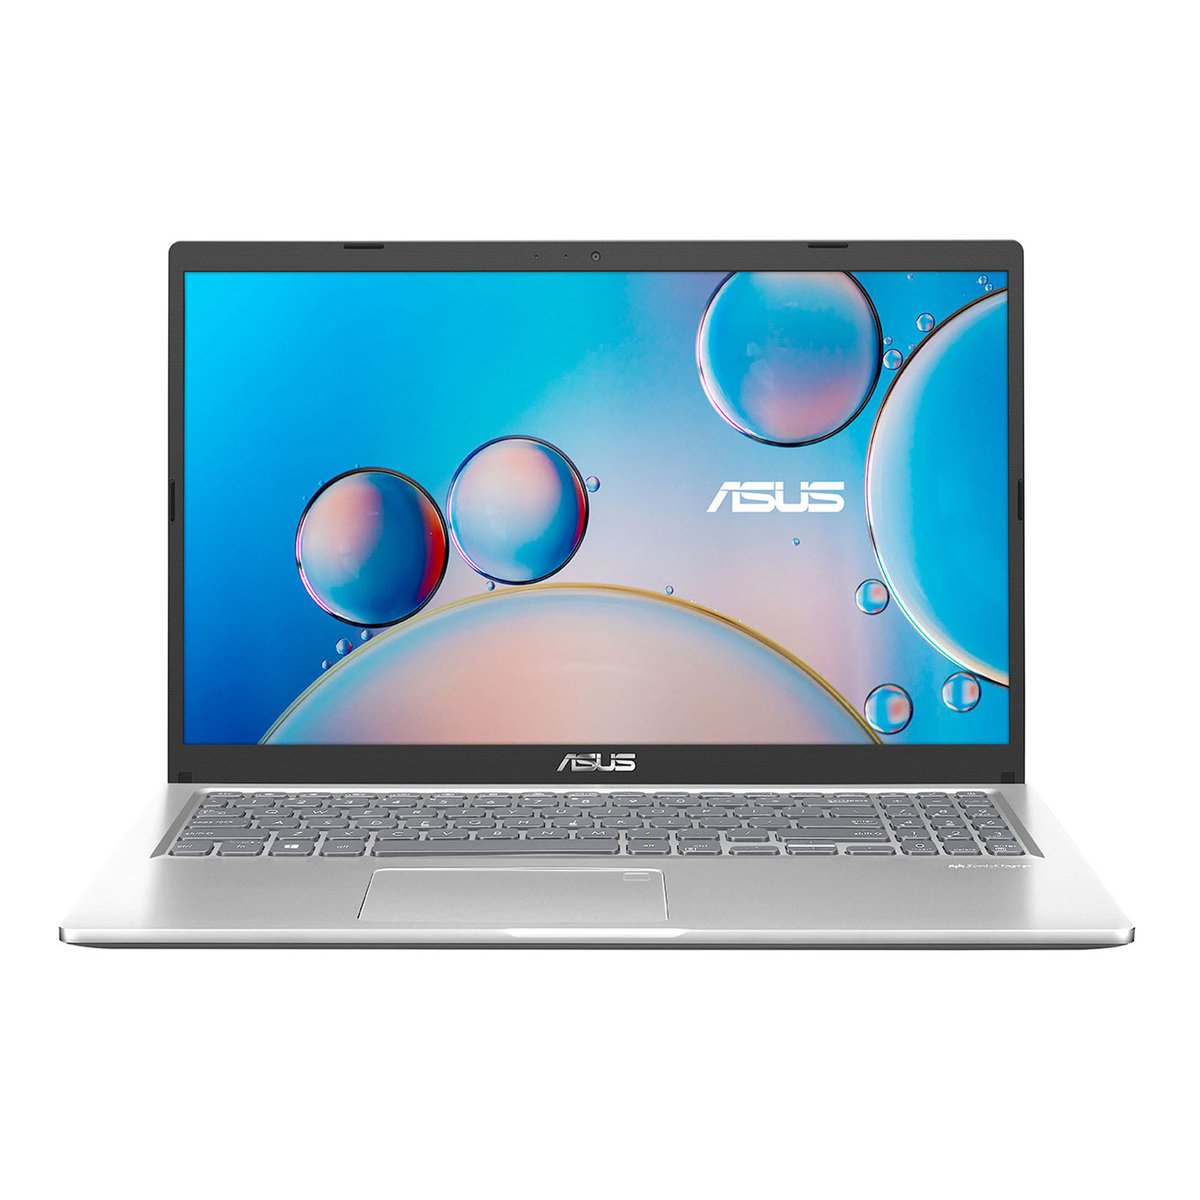 Asus X515 Laptop, 15.6 Inches, Intel Celeron N4020, RAM, 128GB SSD, UHD Graphics 600, Windows 11 Home in S Transparent Silver, X515MA-BR913WS Online at Best Price | Notebook | Lulu UAE